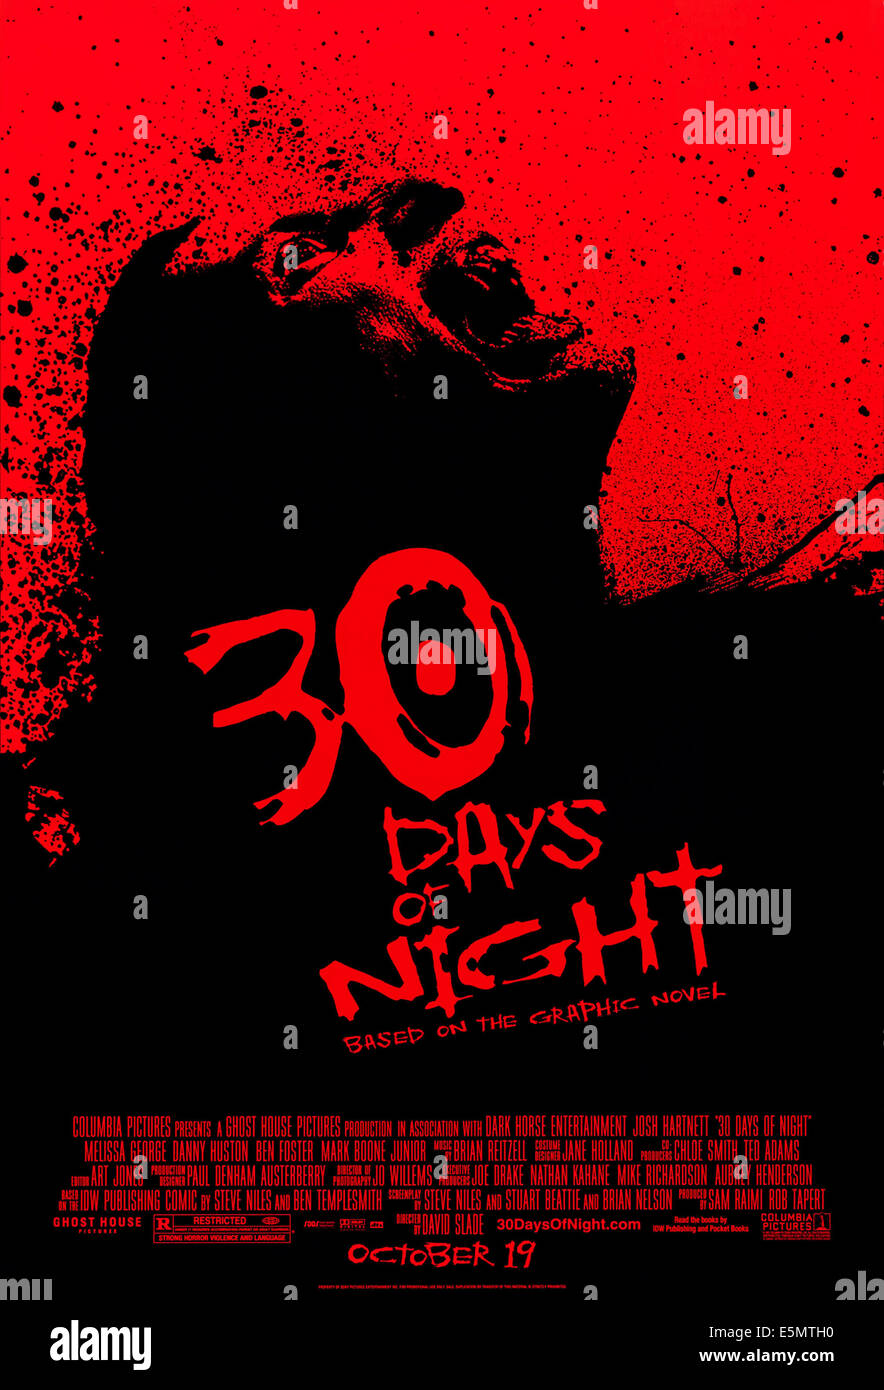 THIRTY DAYS OF NIGHT, (aka 30 DAYS OF NIGHT), US advance poster art, 2007. ©Columbia Pictures/courtesy Everett Collection Stock Photo